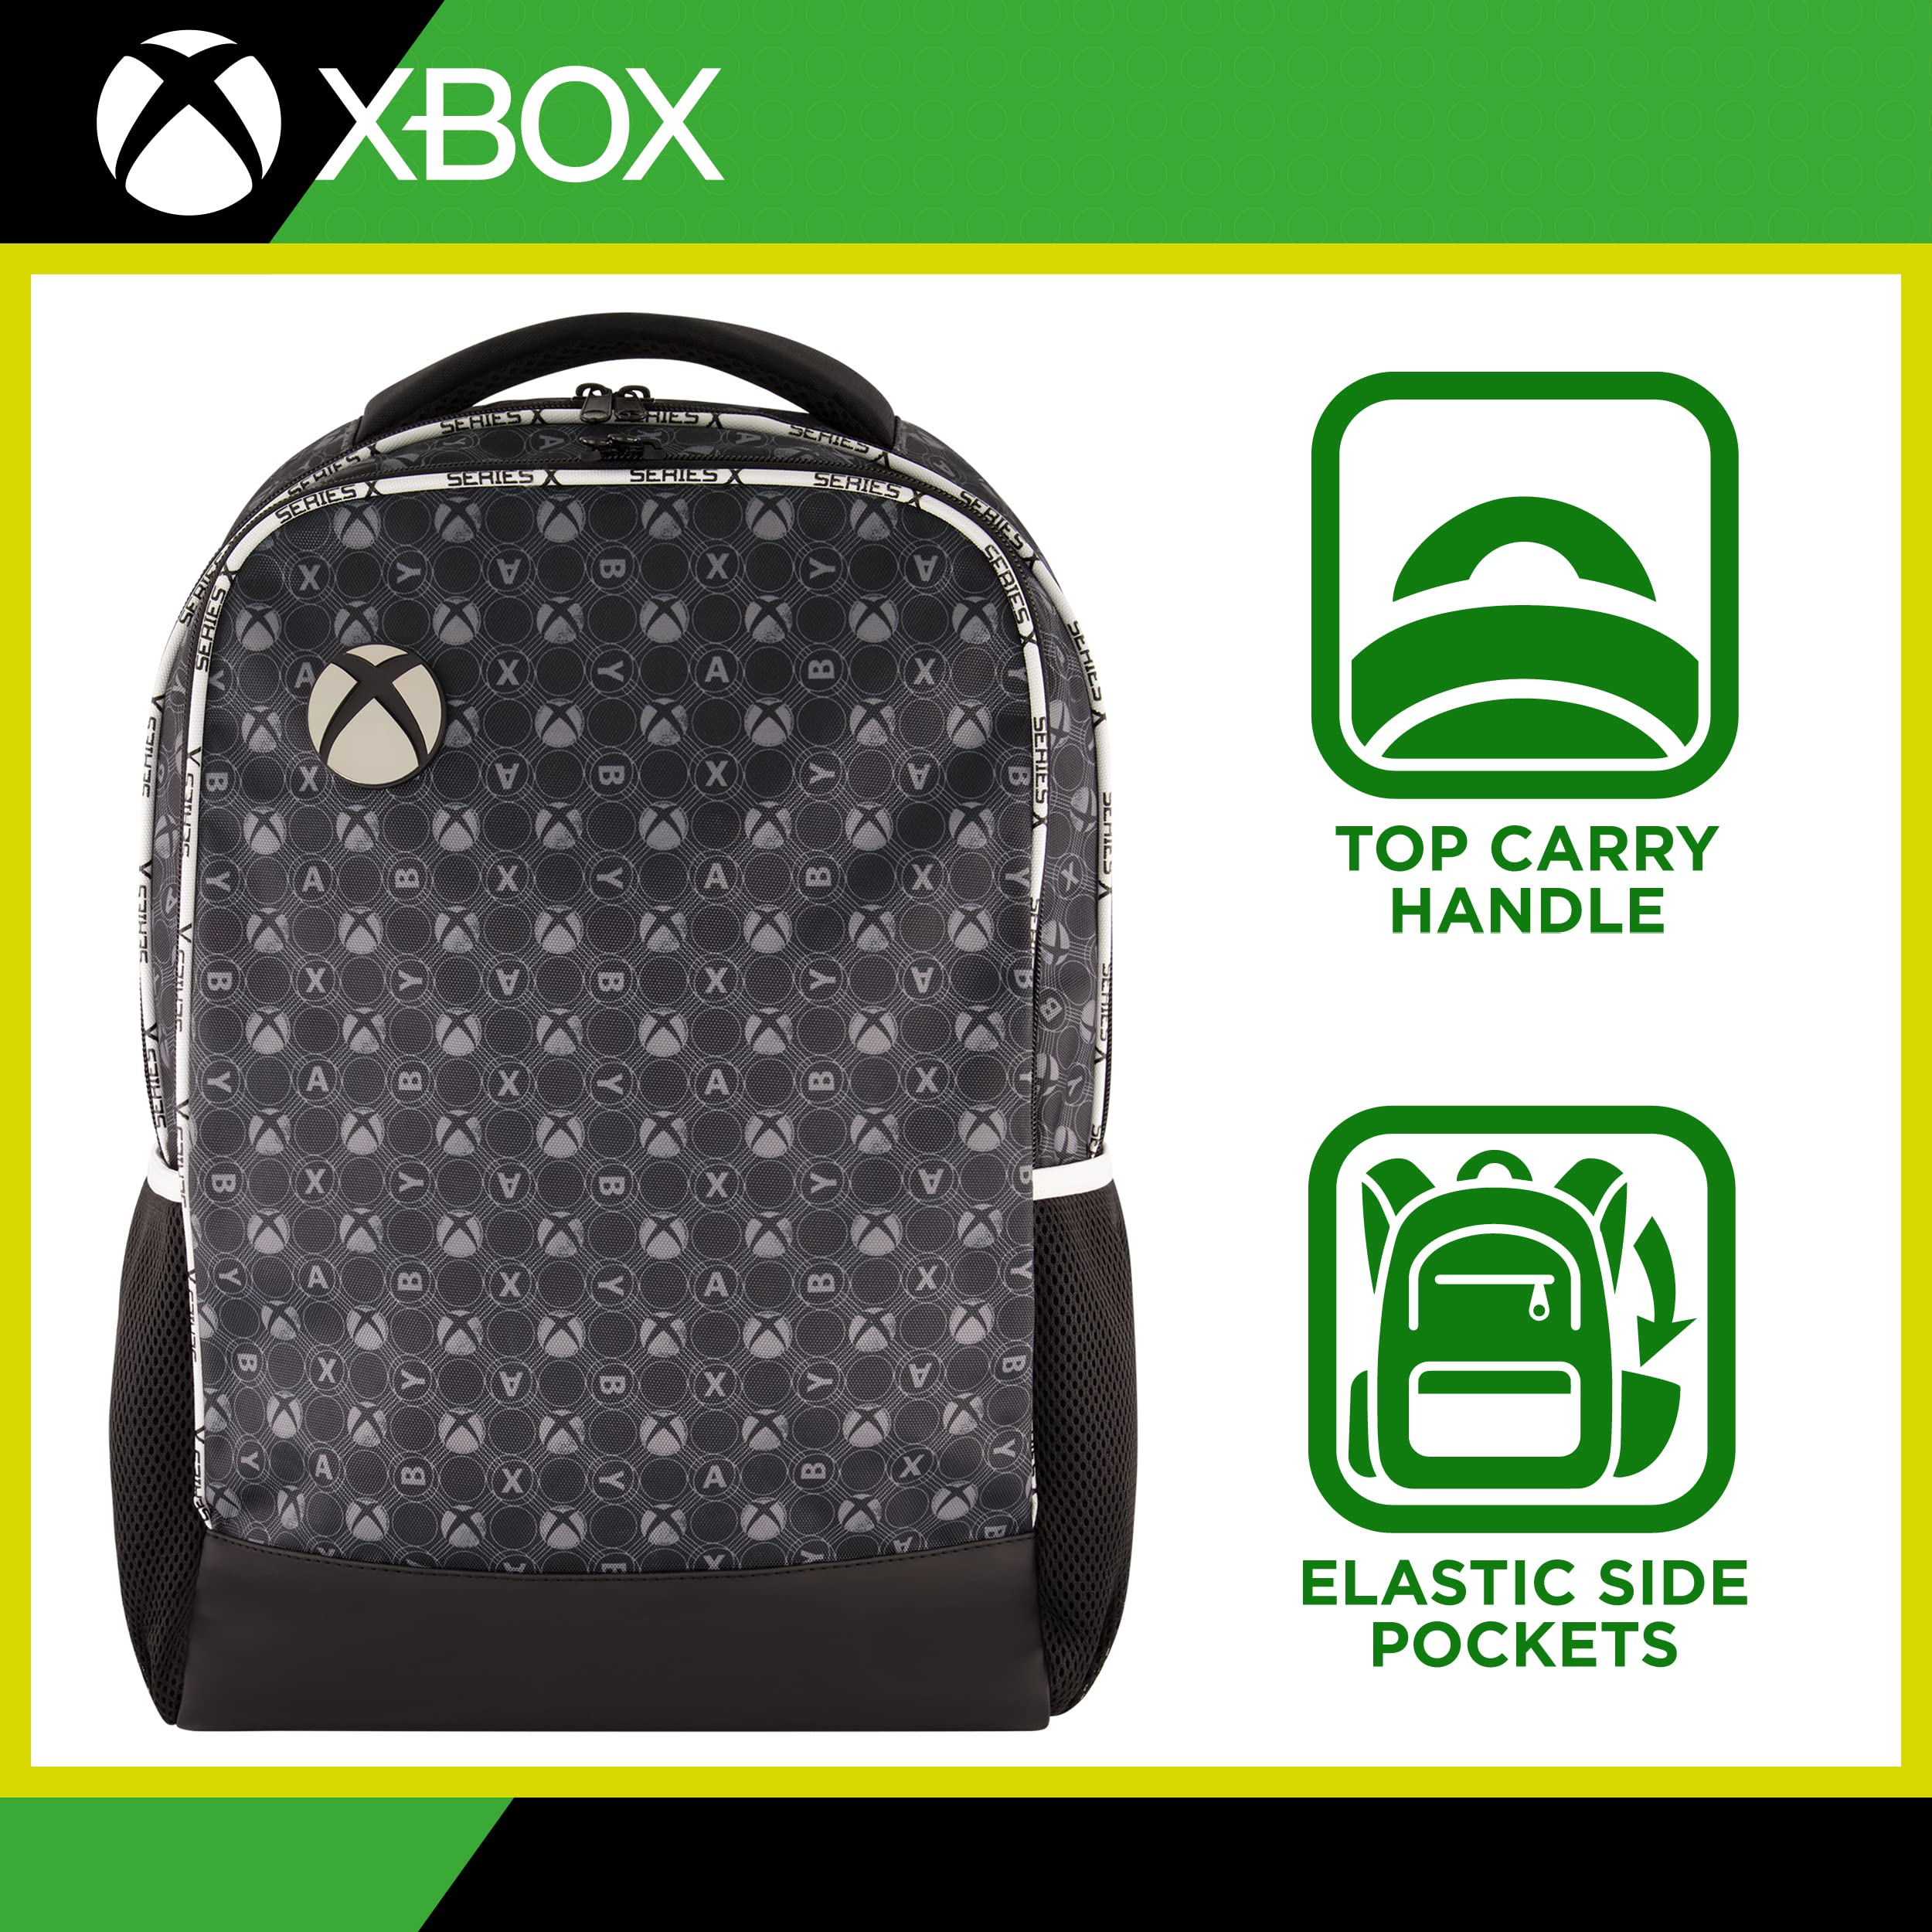 Microsoft Xbox 13 Inch Sleeve Laptop Backpack, Padded Computer Bag for Commute or Travel, Black